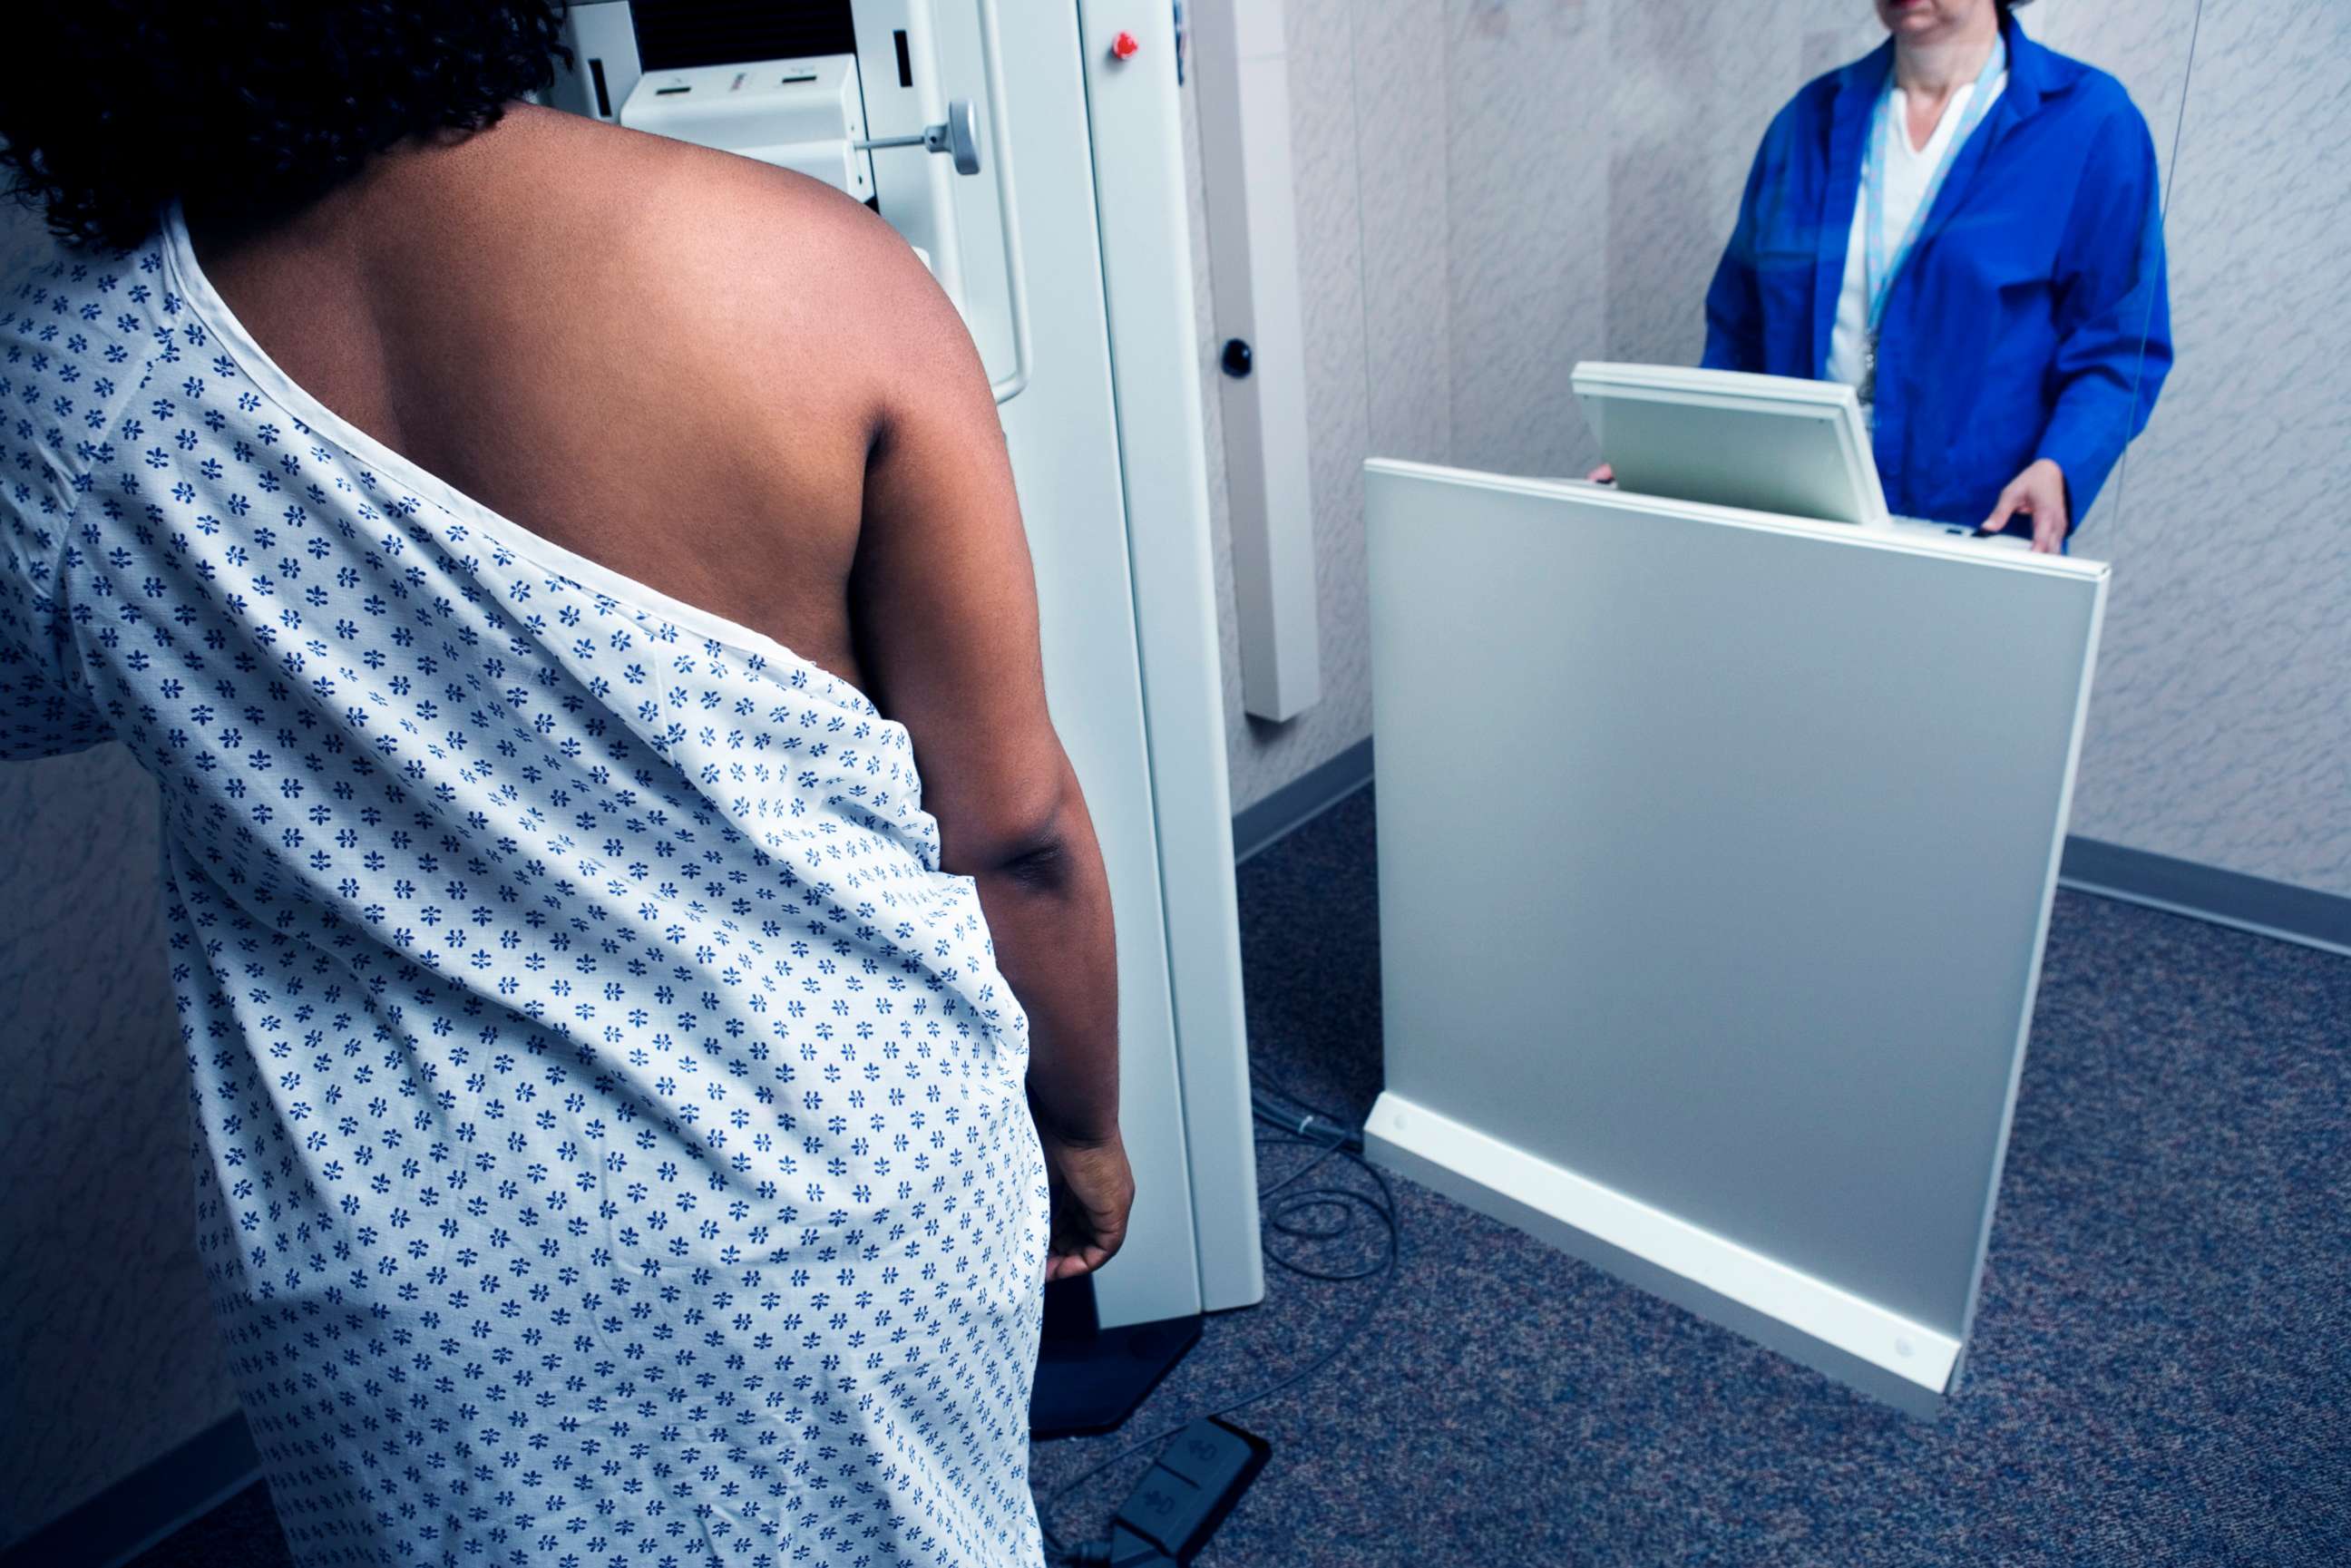 PHOTO: In this undated file photo, a woman gets a mammogram.